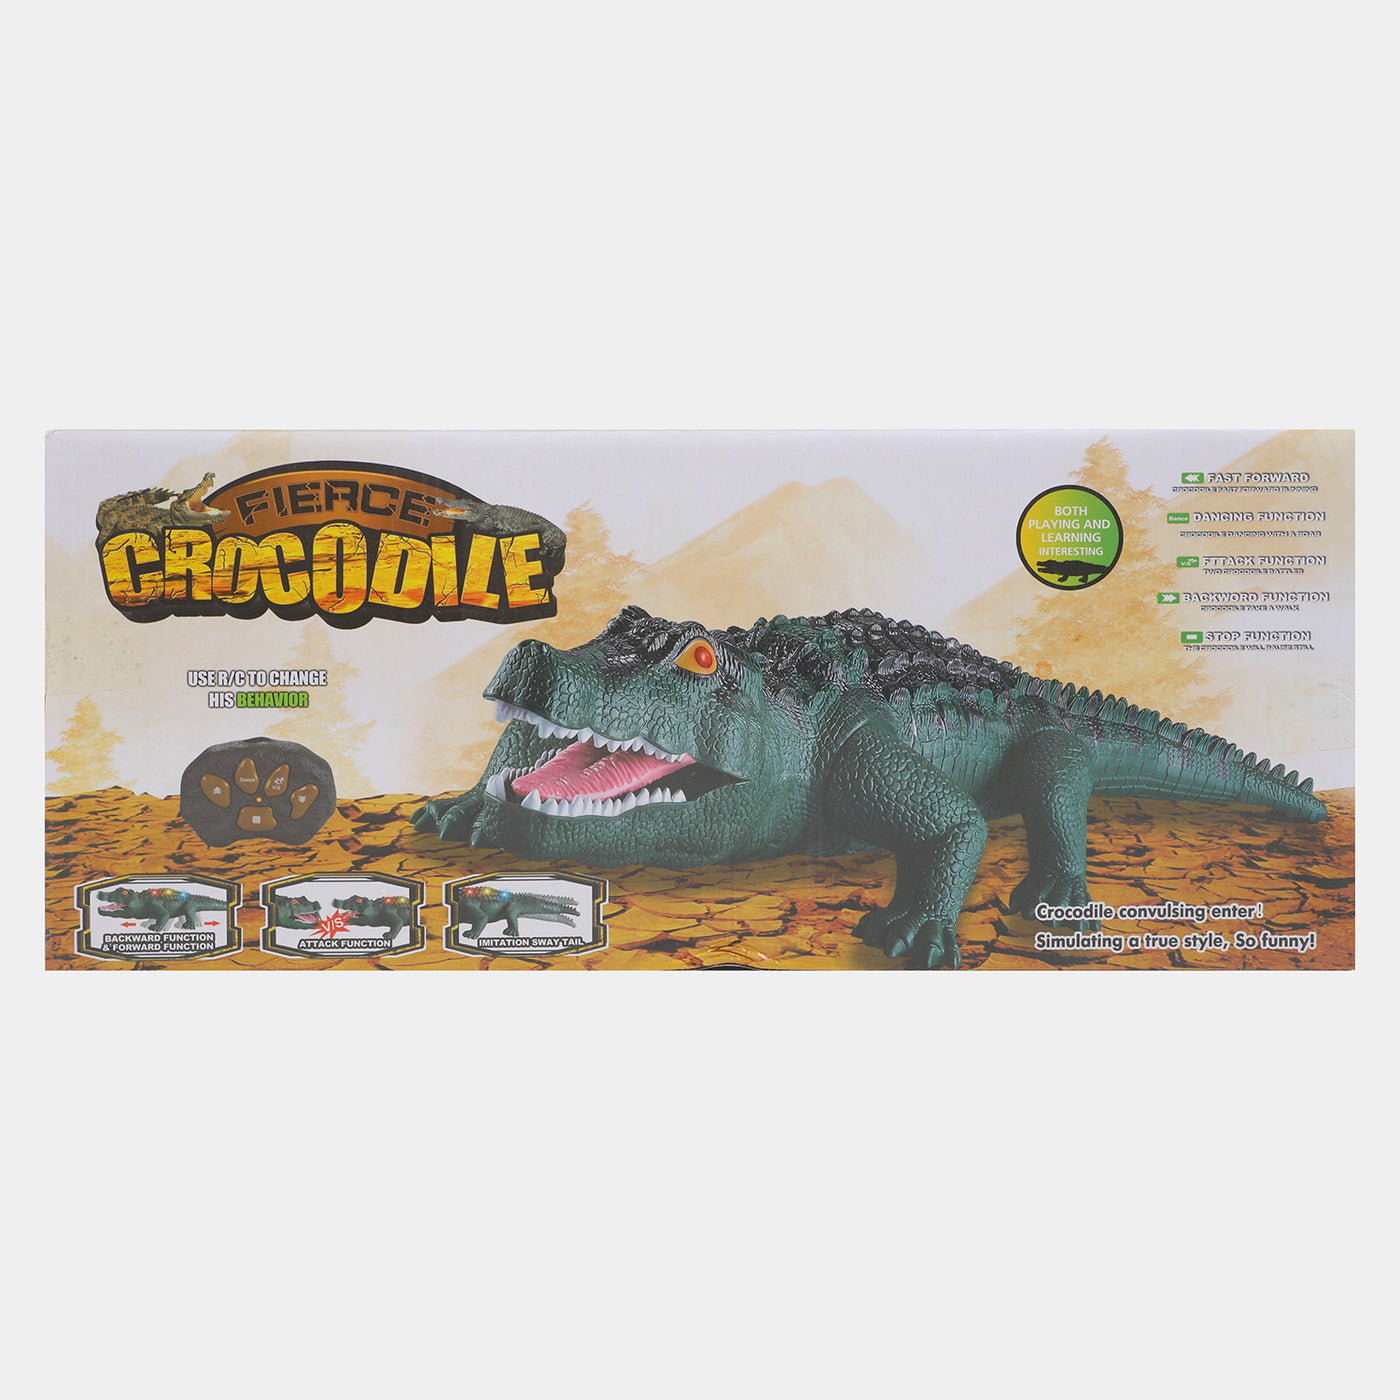 Remote Control Crocodile with LED Lights & Sound Effects